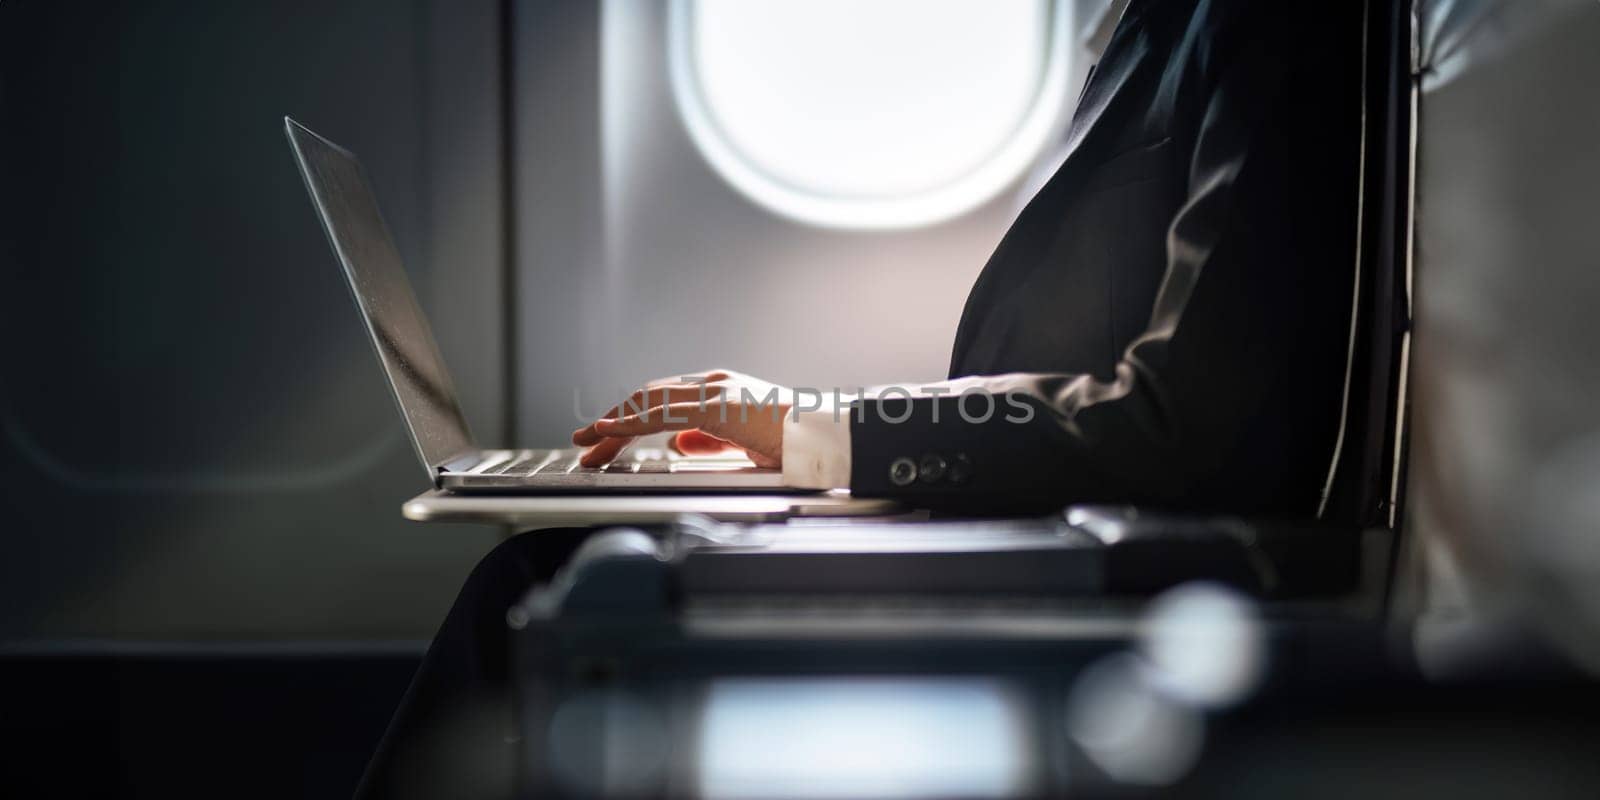 Successful Asian business woman, Business woman working in airplane cabin during flight on laptop computer by nateemee